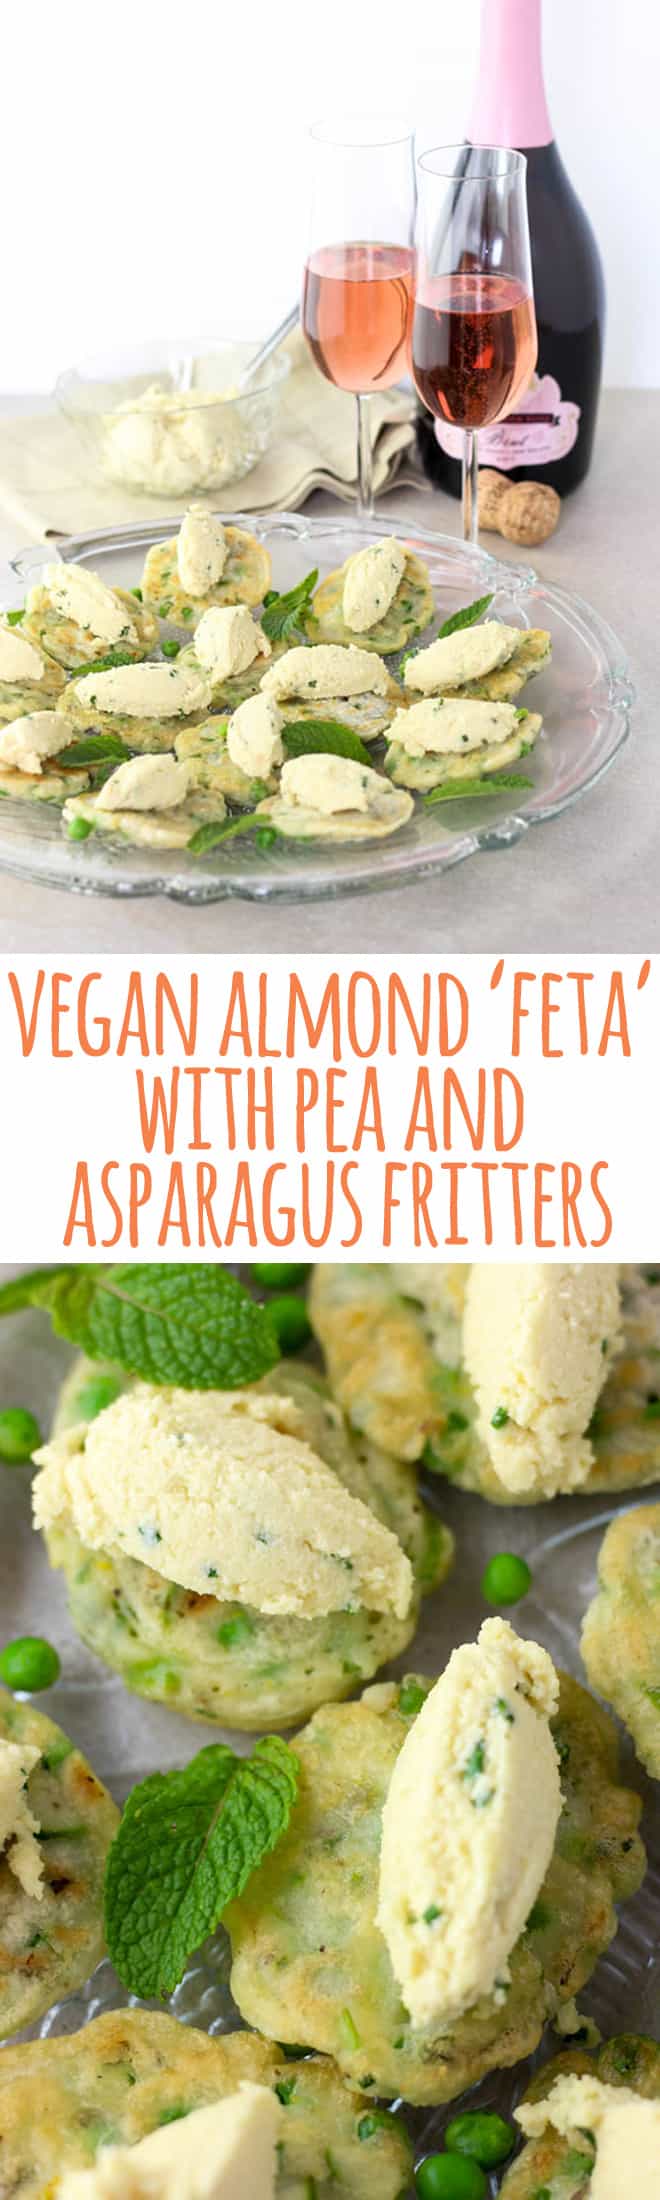 These fresh and elegant mouthfuls topped with a vegan almond 'feta' are a unique hors d'oeuvres, or even a light lunch.